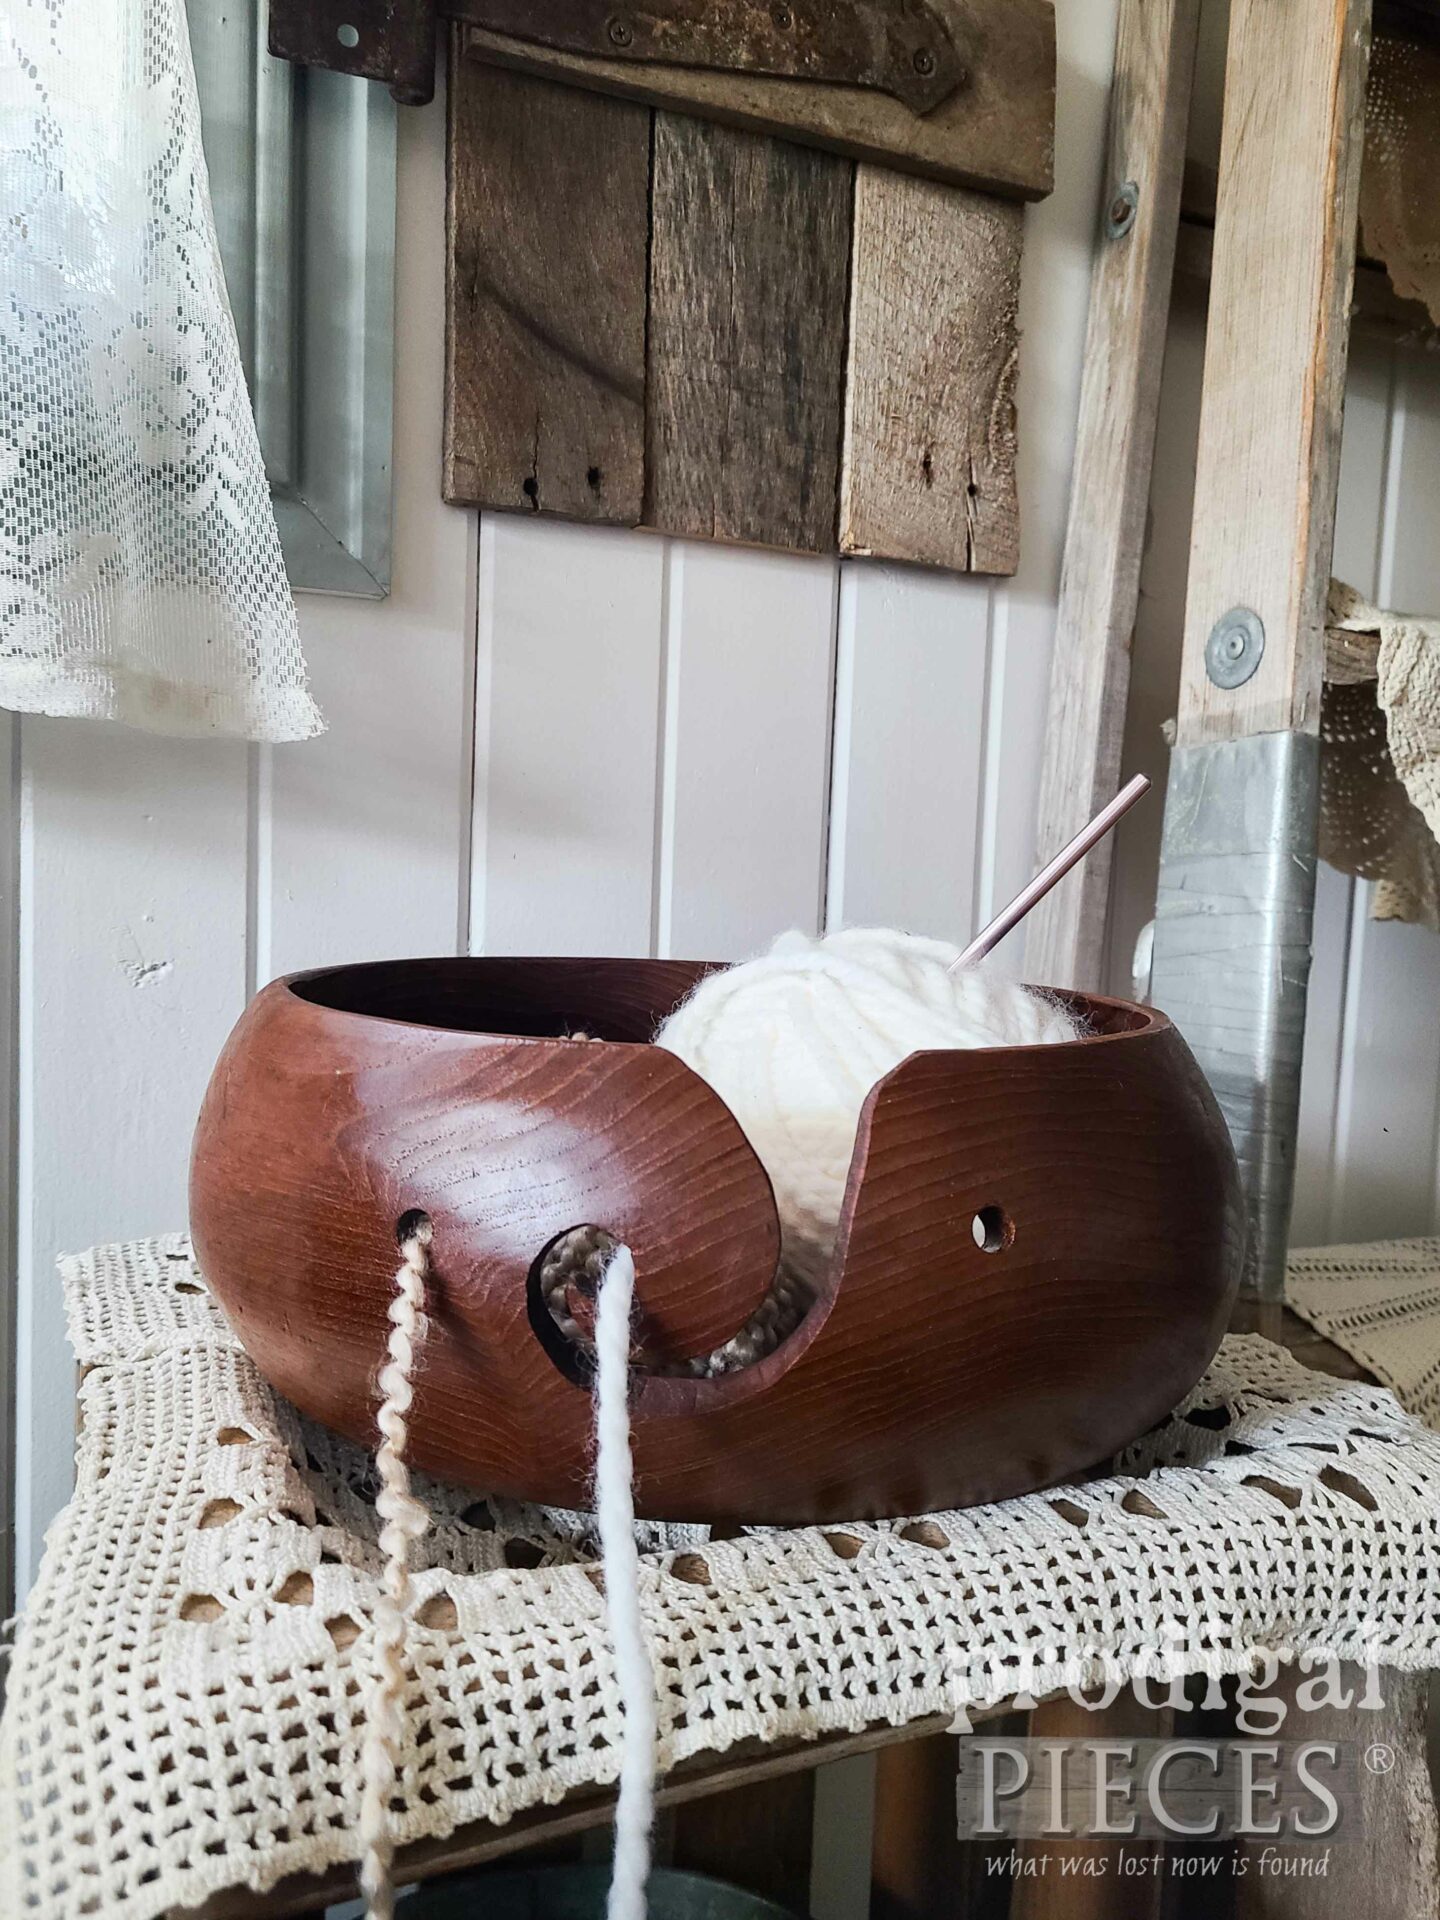 Upcycled Wood Yarn Bowl from Salad Bowls by Larissa of Prodigal Pieces | prodigalpieces.com #prodigalpieces #diy #crafts #upcycled